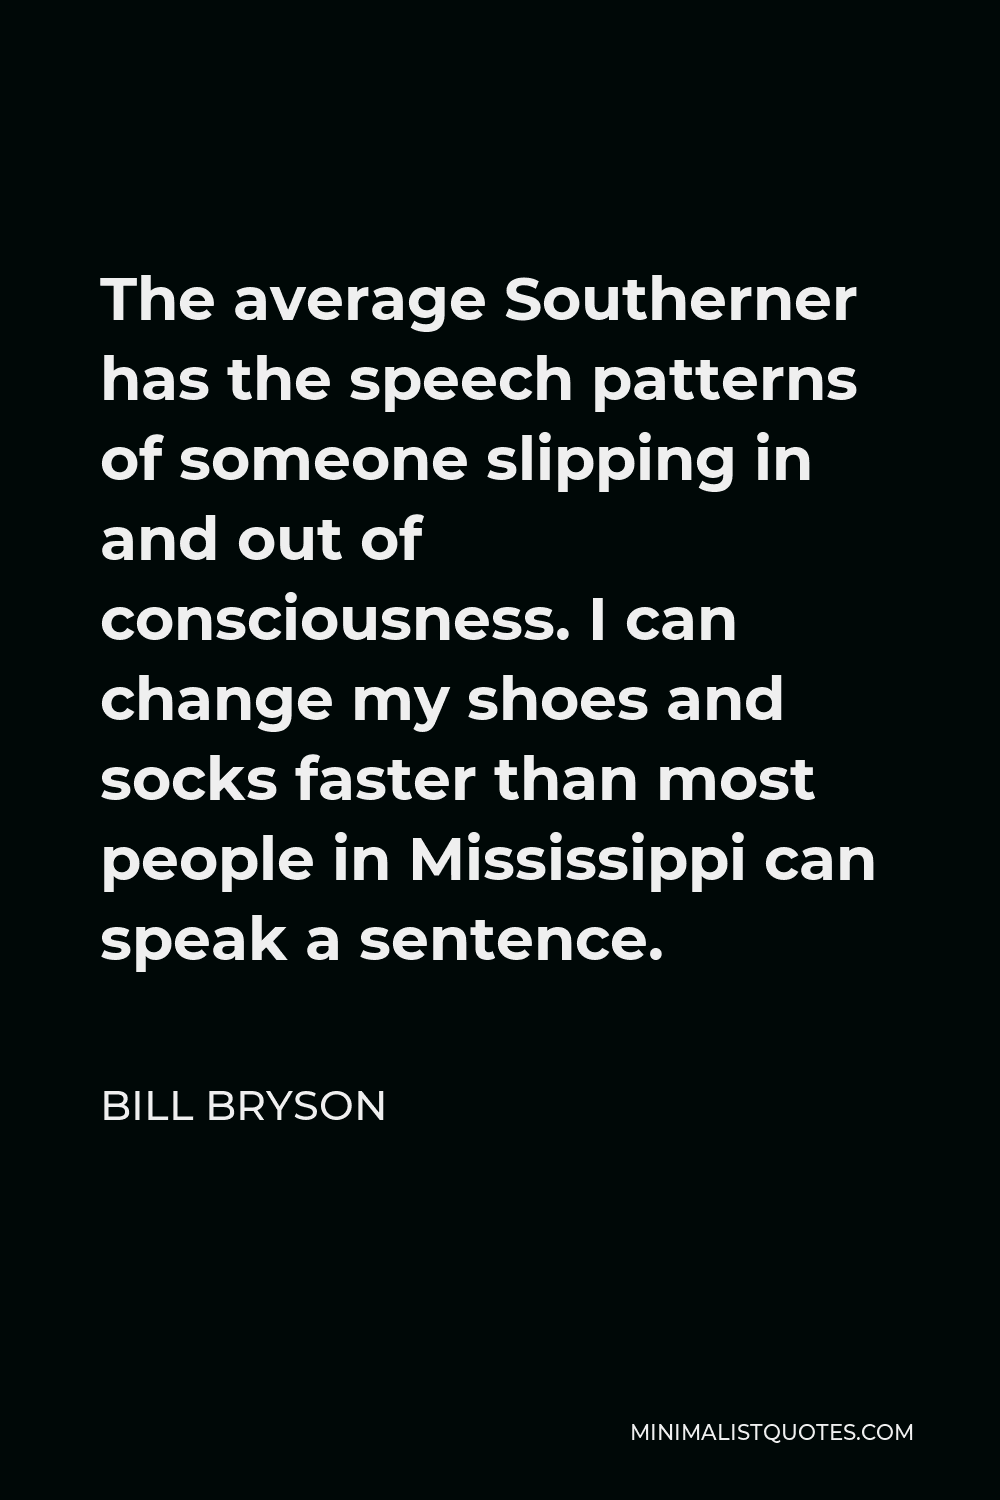 Bill Bryson Quote - The average Southerner has the speech patterns of someone slipping in and out of consciousness. I can change my shoes and socks faster than most people in Mississippi can speak a sentence.